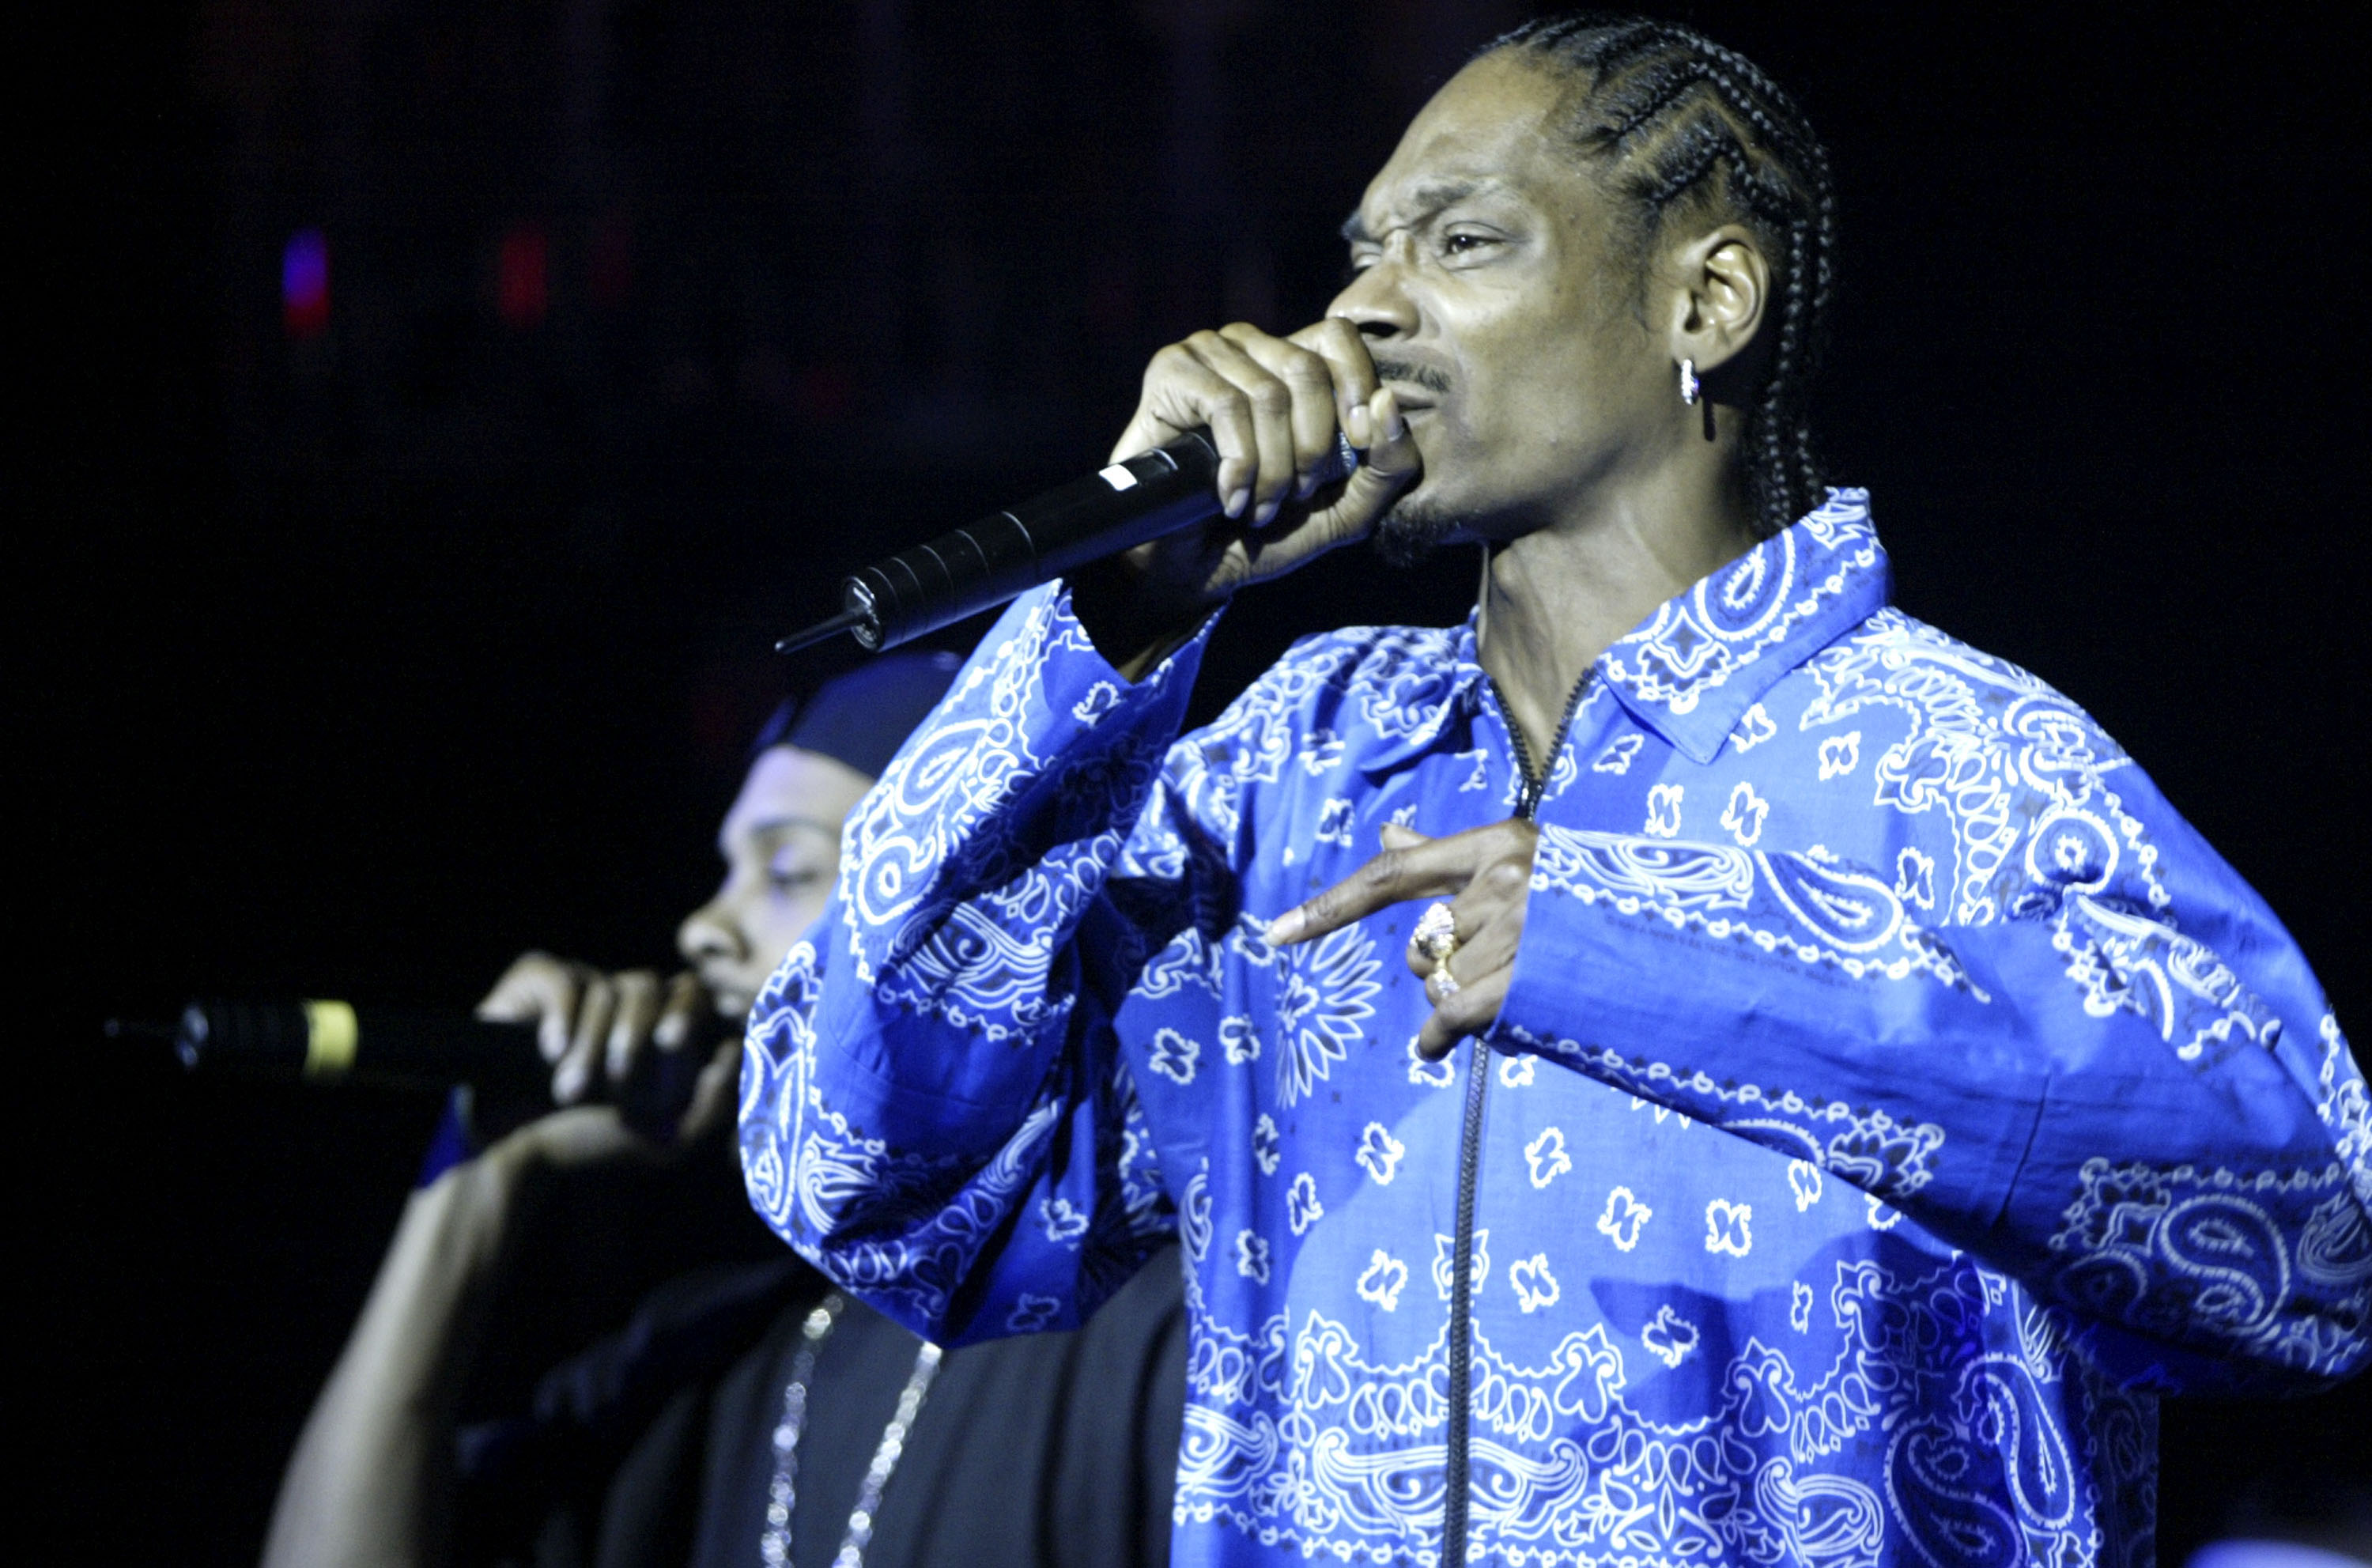 7 of Snoop Dogg's most iconic outfits